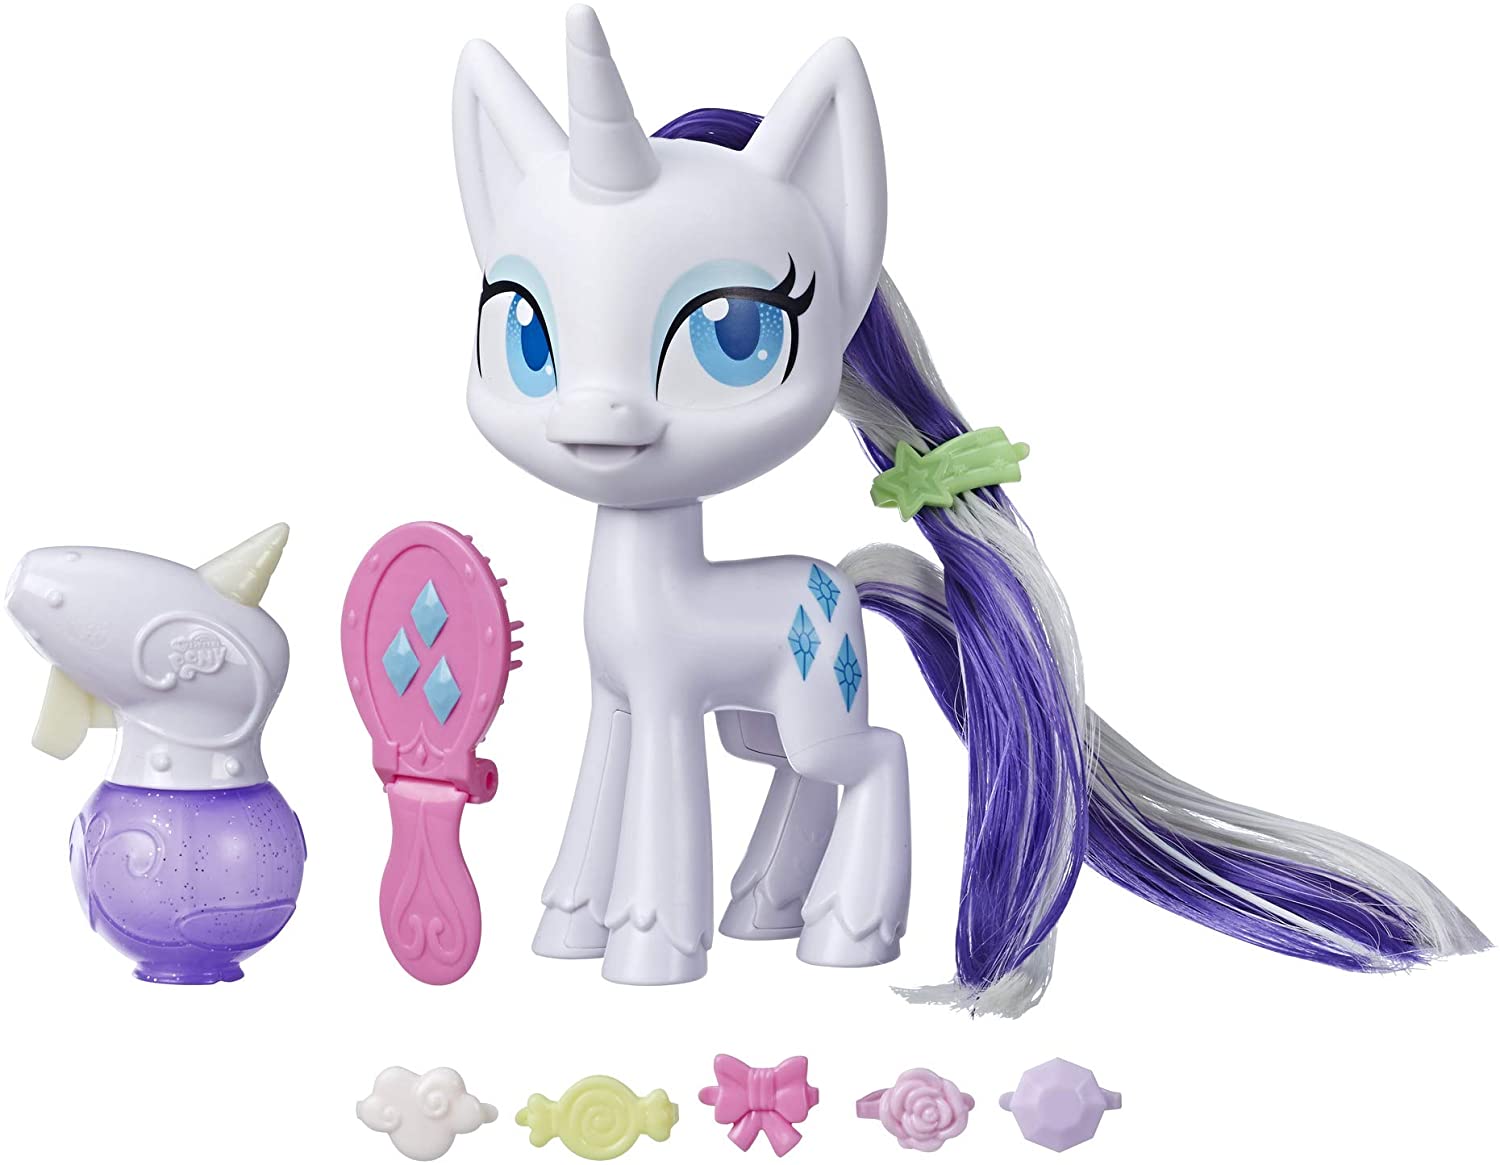 My Little Pony E9104 Magical Mane Rarity Toy 16.5 Cm Hairstyling Pony Figur